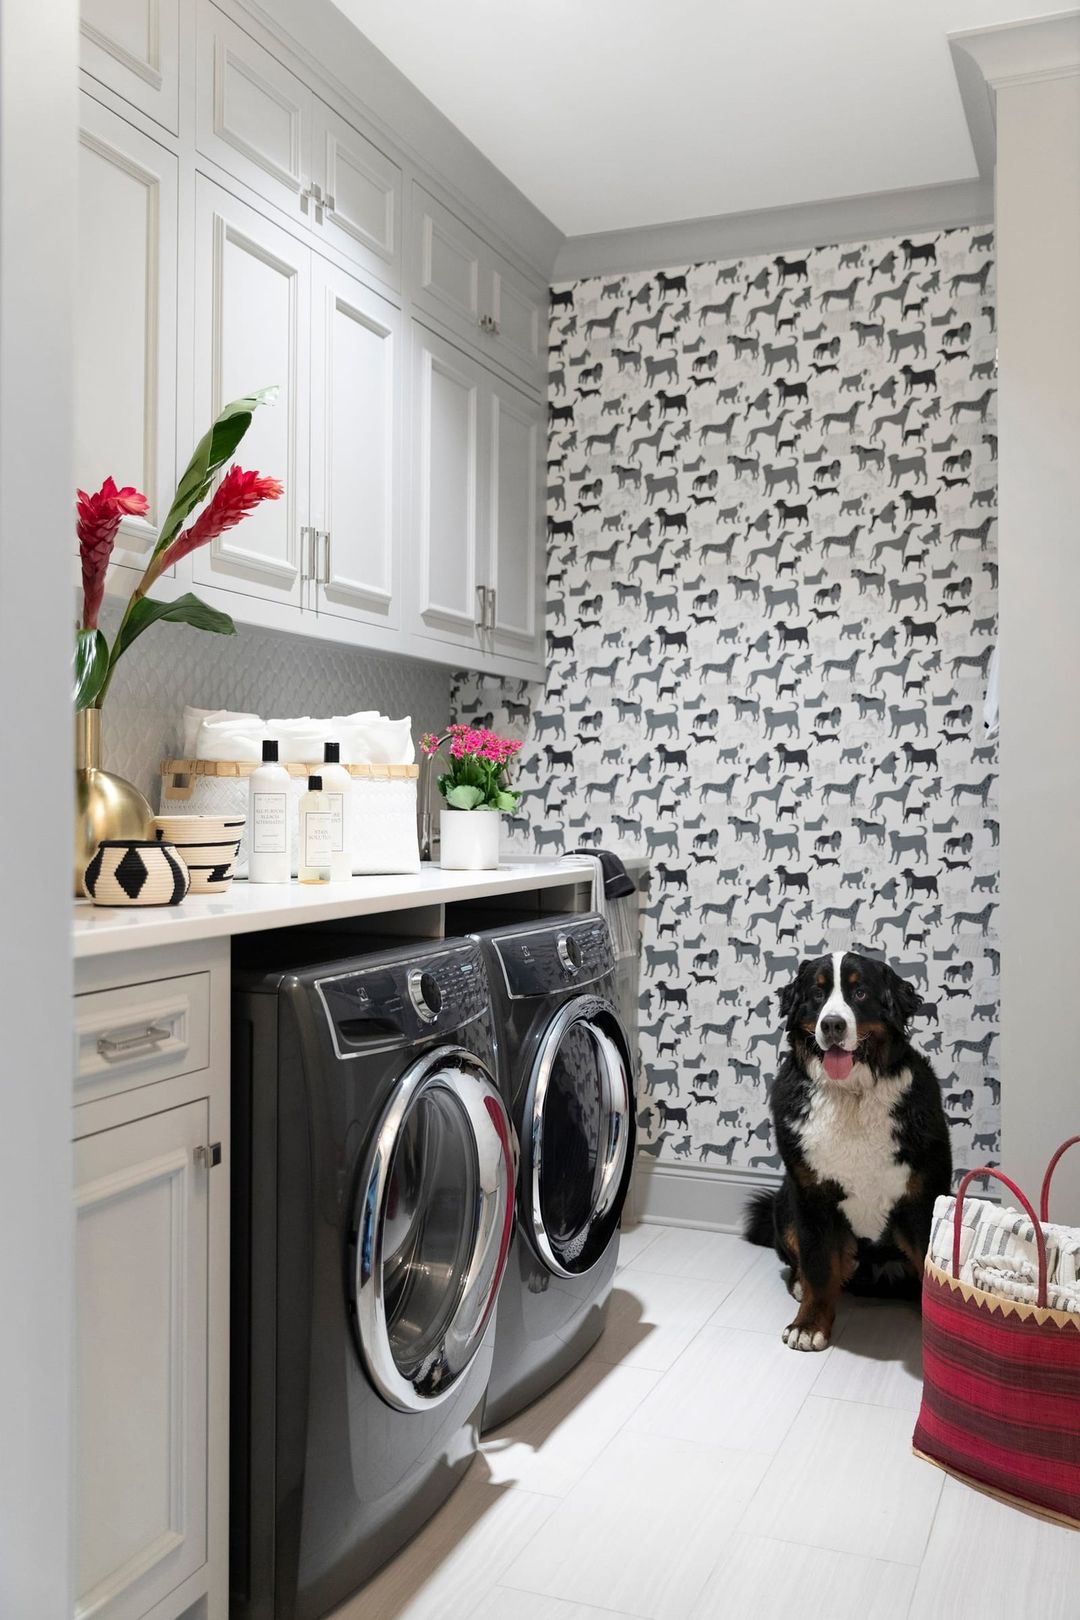 Playful Pups for a Fun Laundry Room